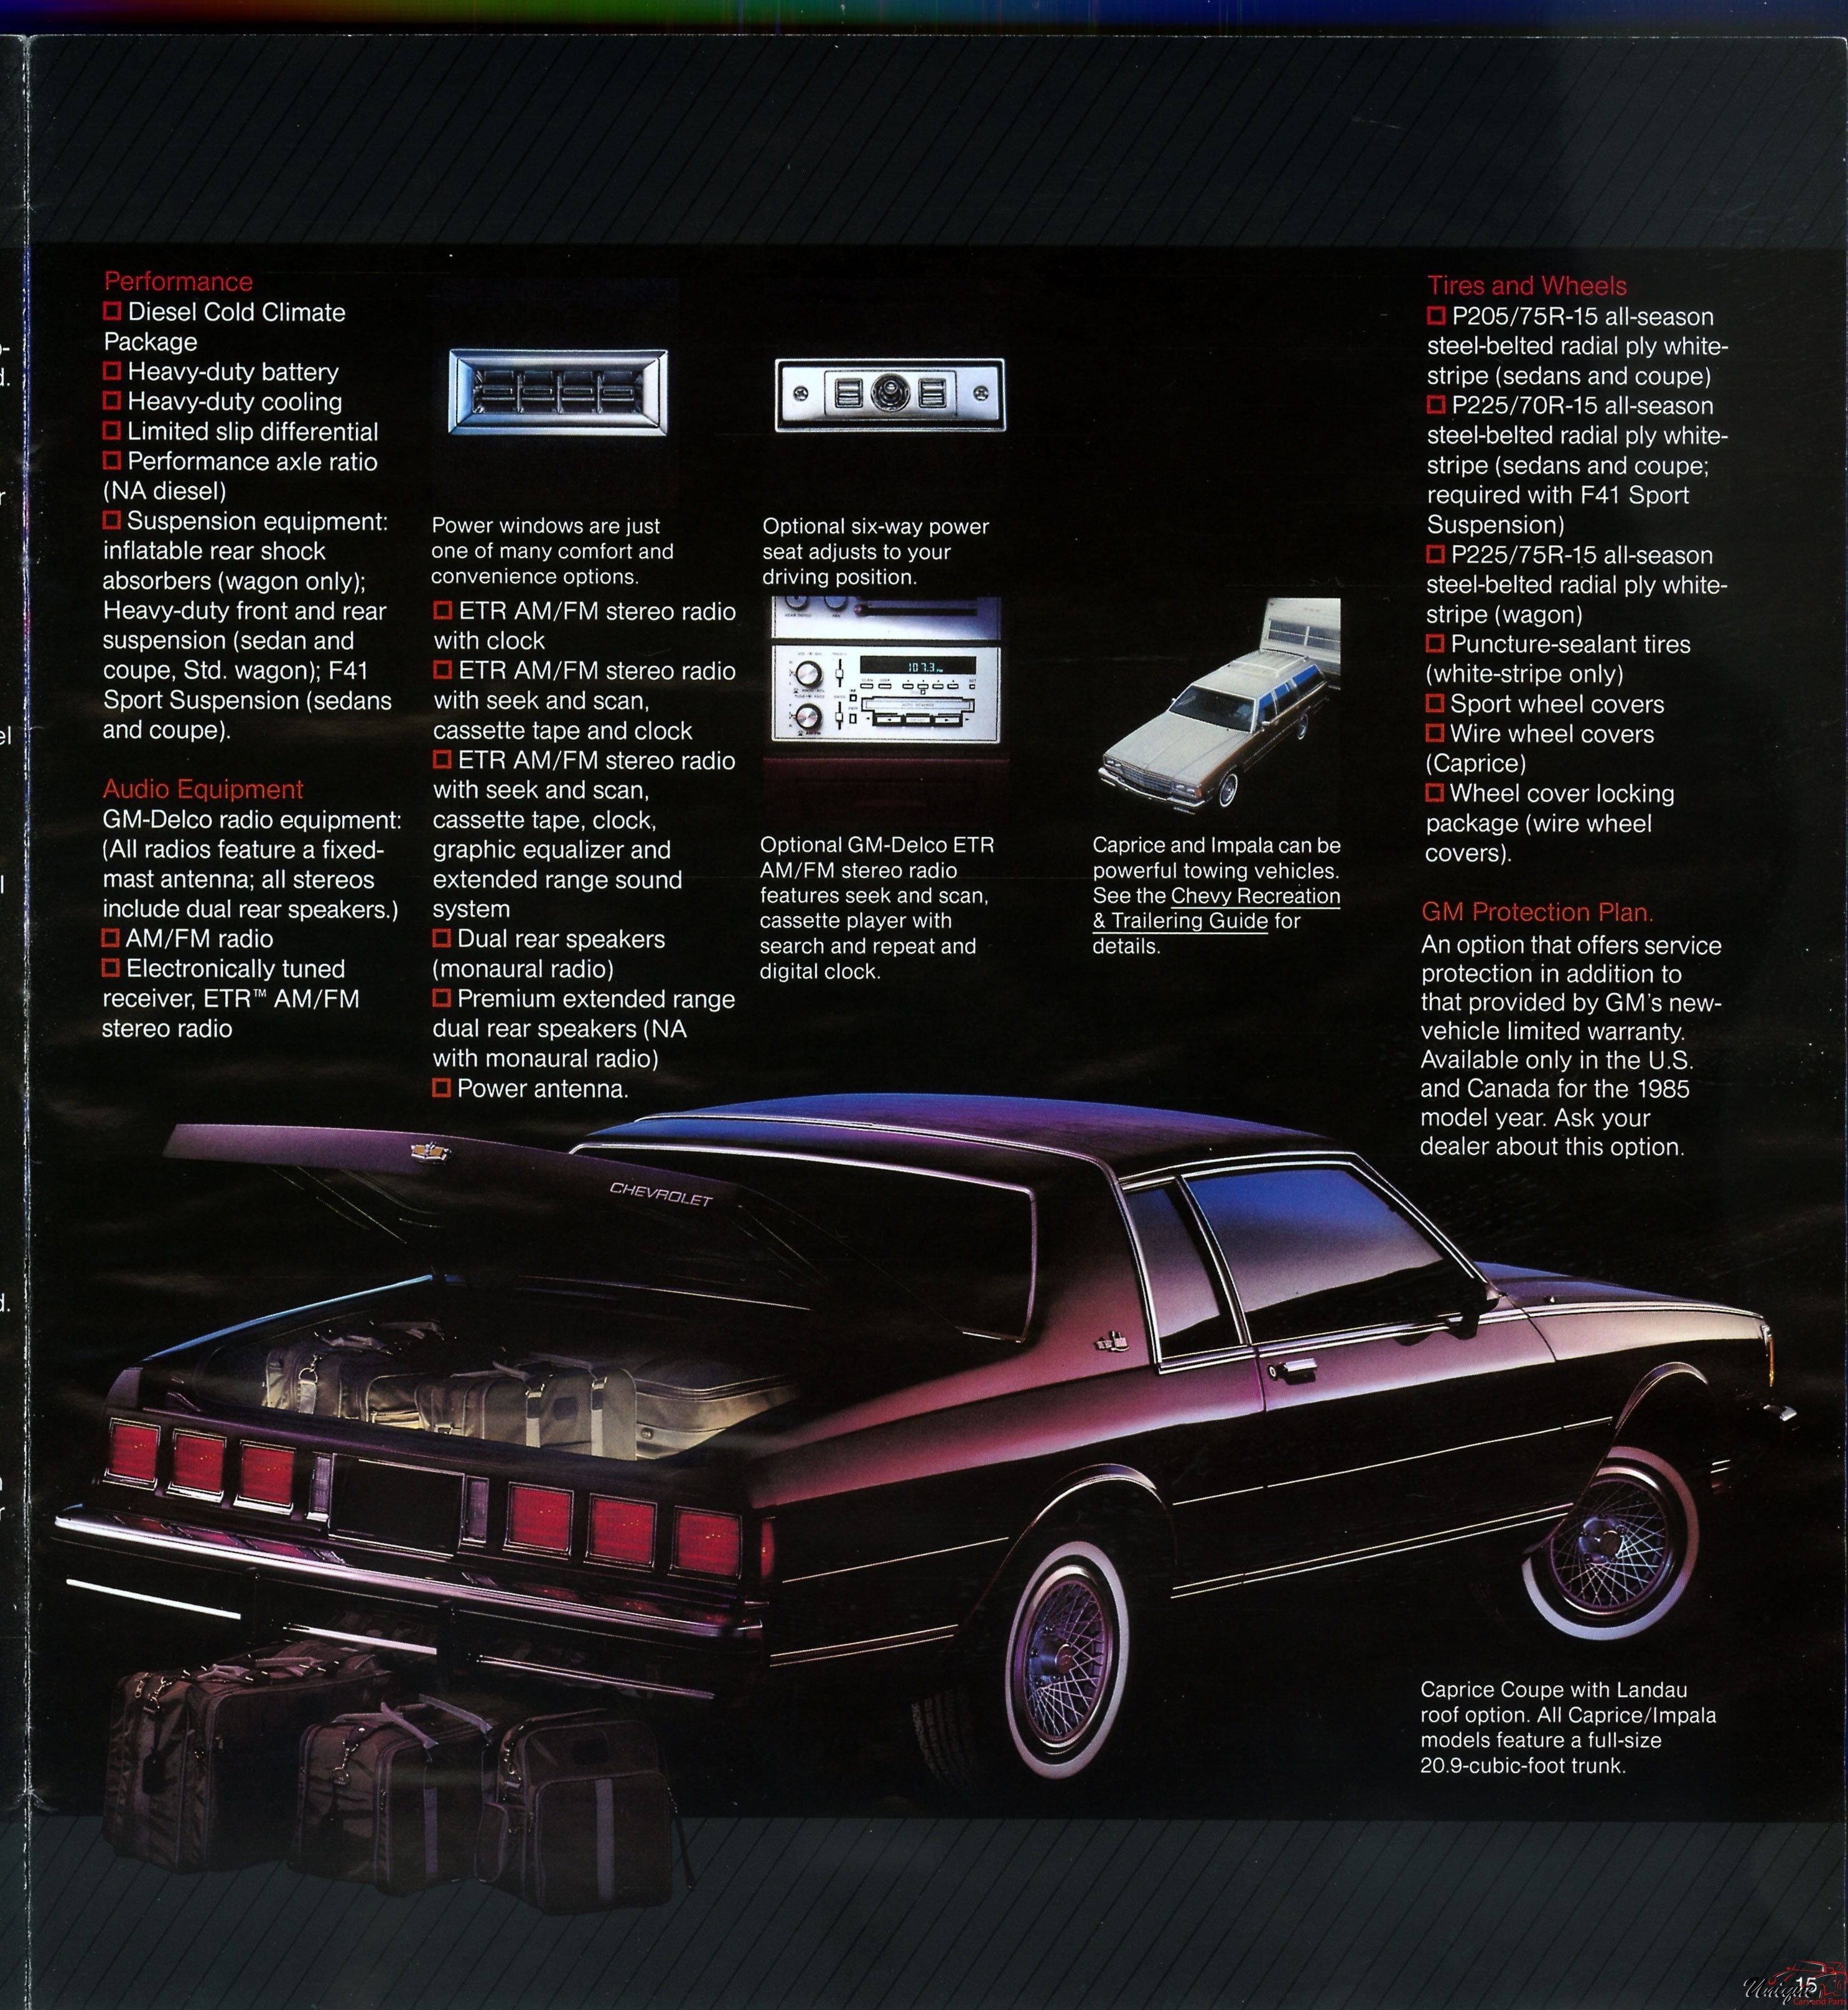 1985 Chevrolet Caprice Brochure Page 8